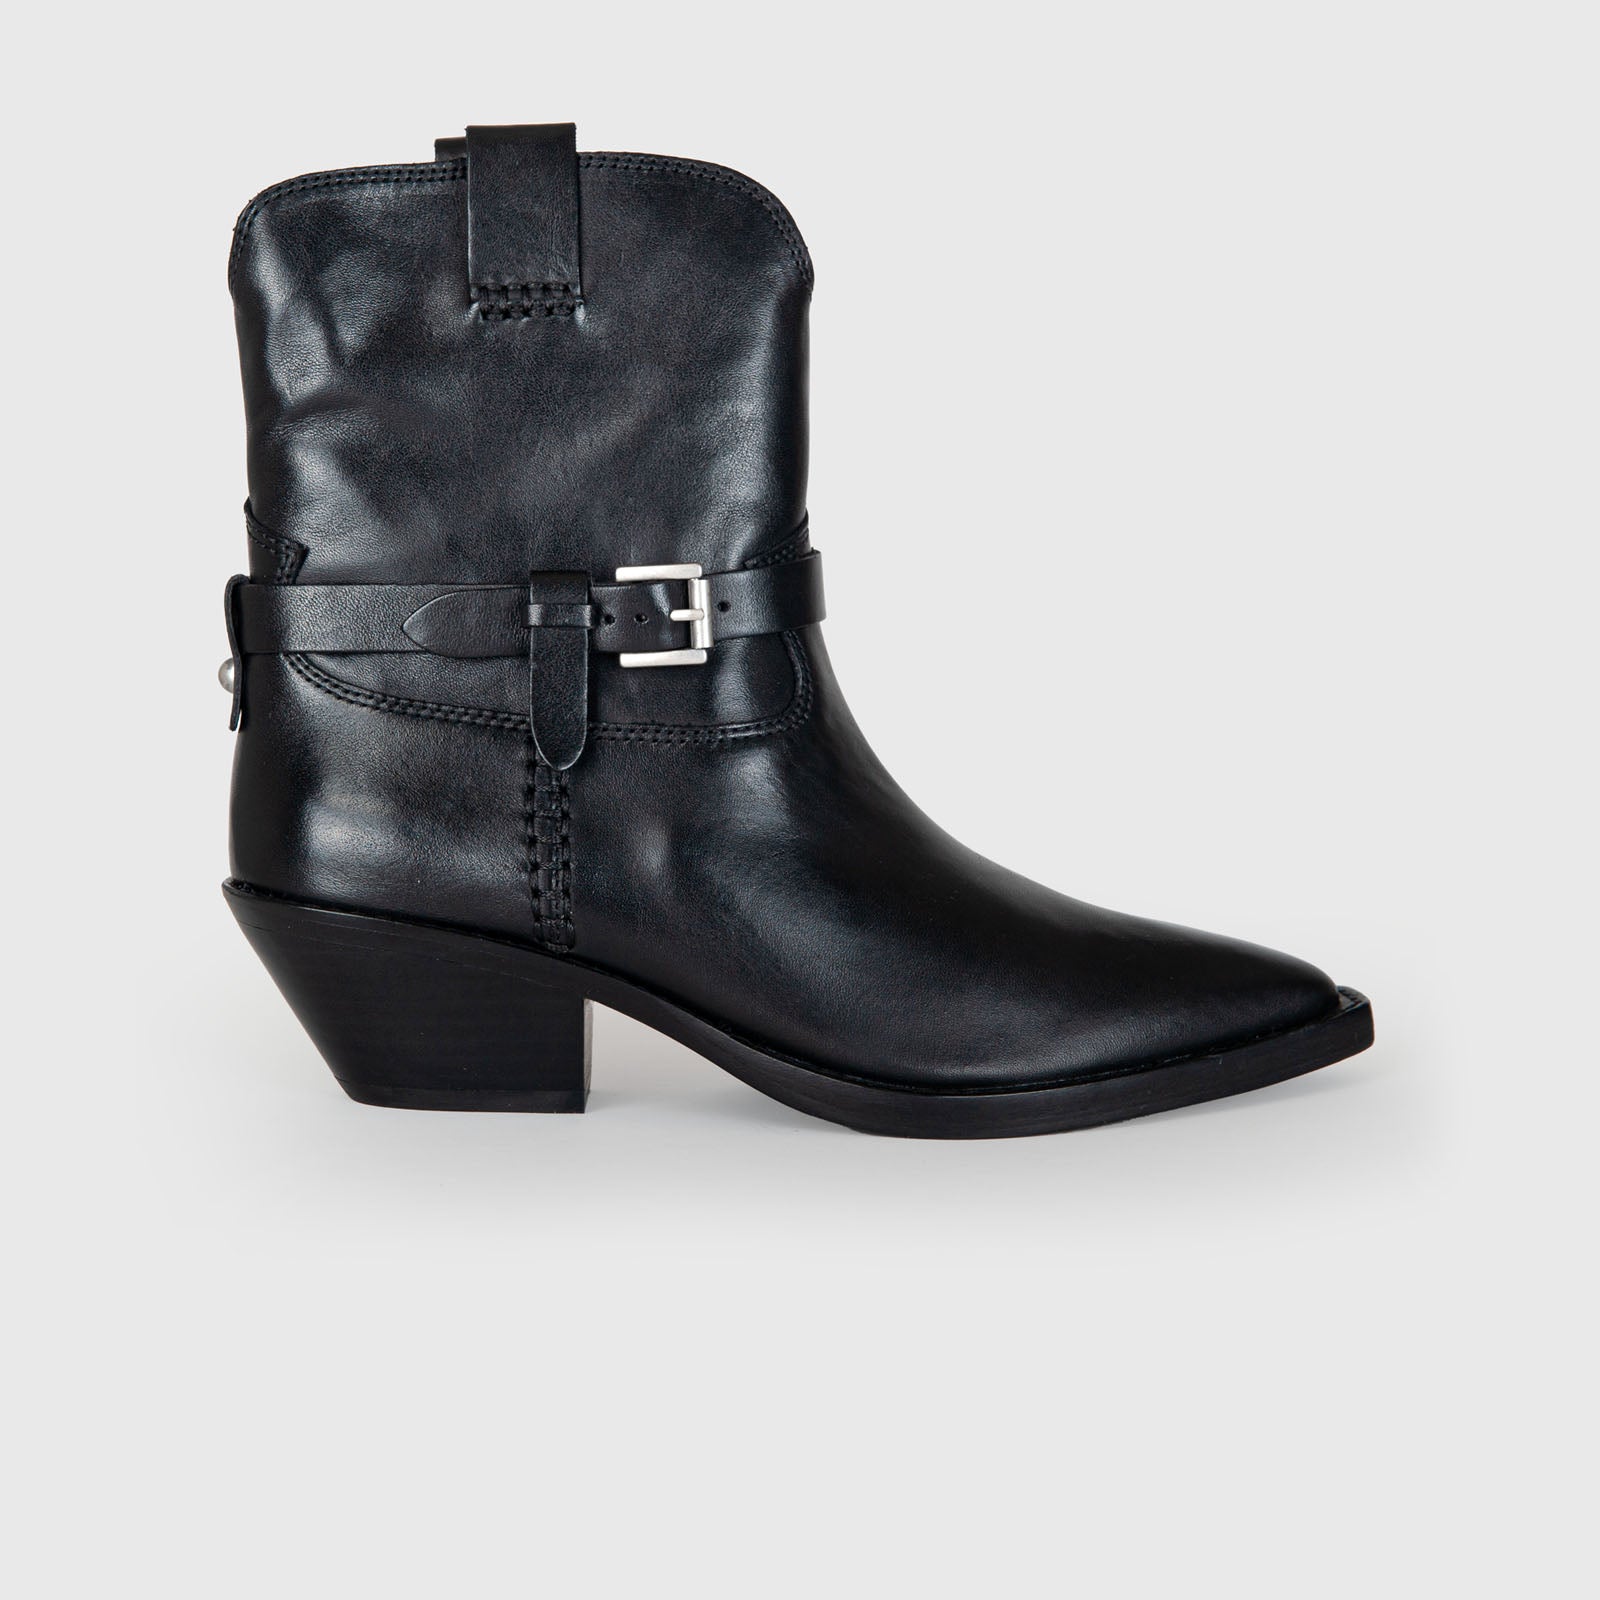 "Dustin Texan Ankle Boot in Black Leather for Women" - 6